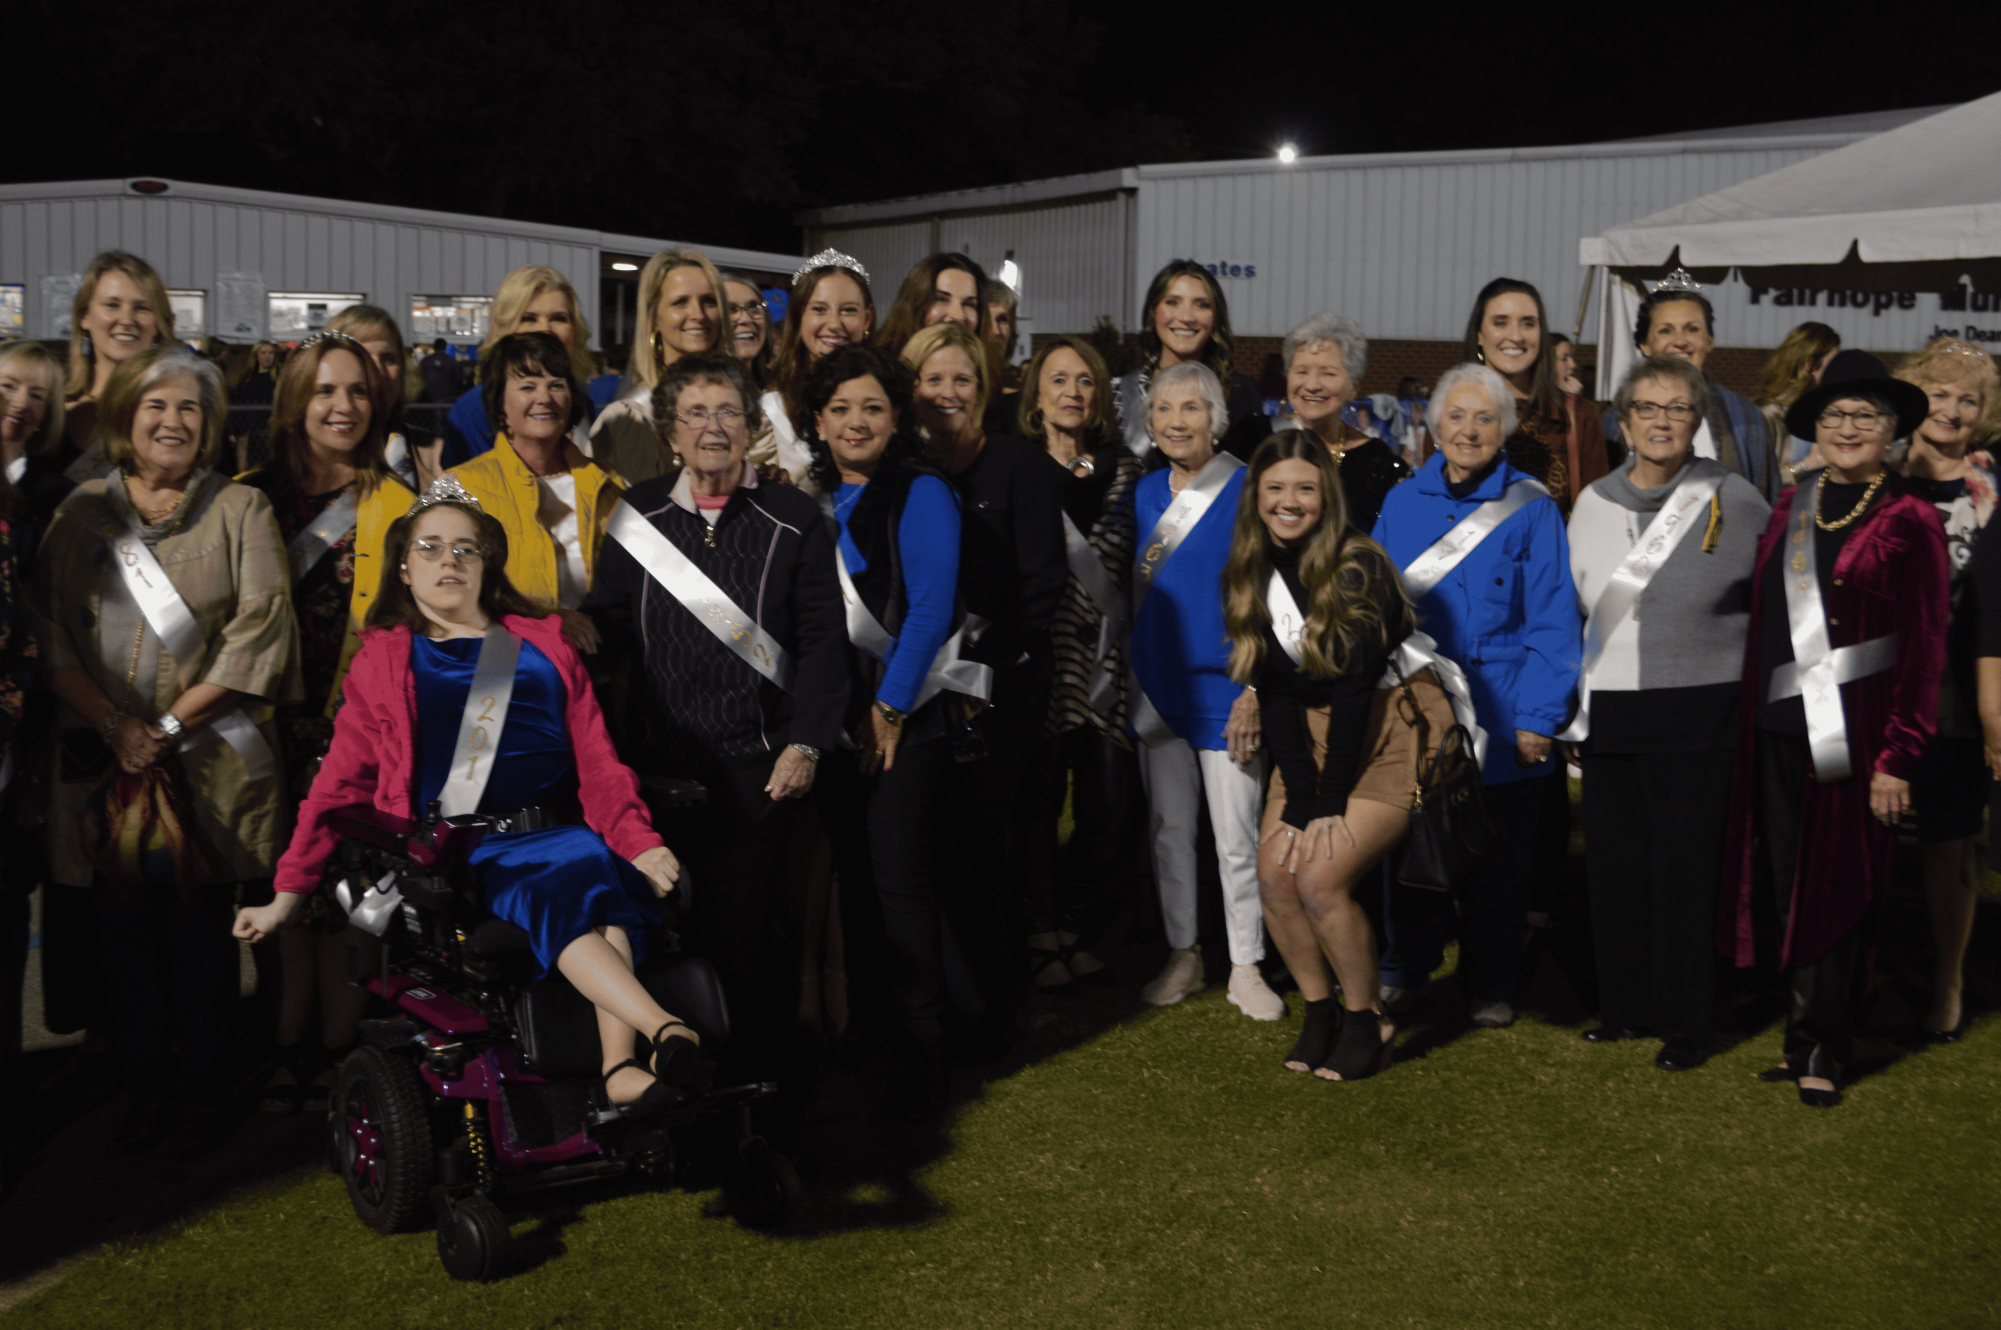 The royal court… Twenty-nine homecoming queens of all ages gather after their introductions. The ladies said their goodbyes and made their way home.